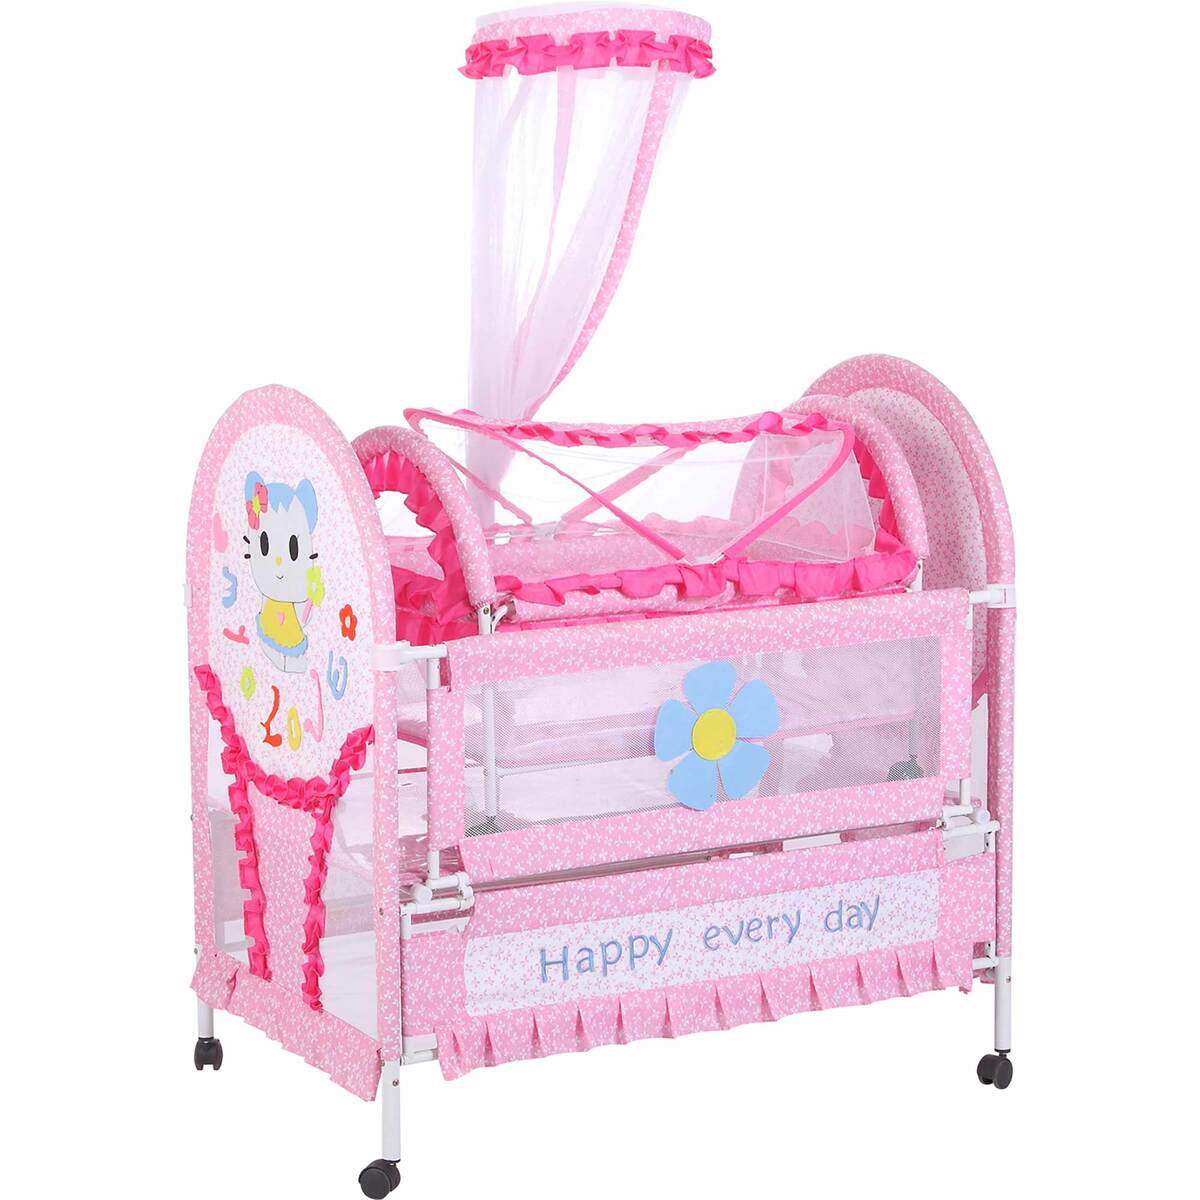 First Step Baby Bed Steel 9753 Pink